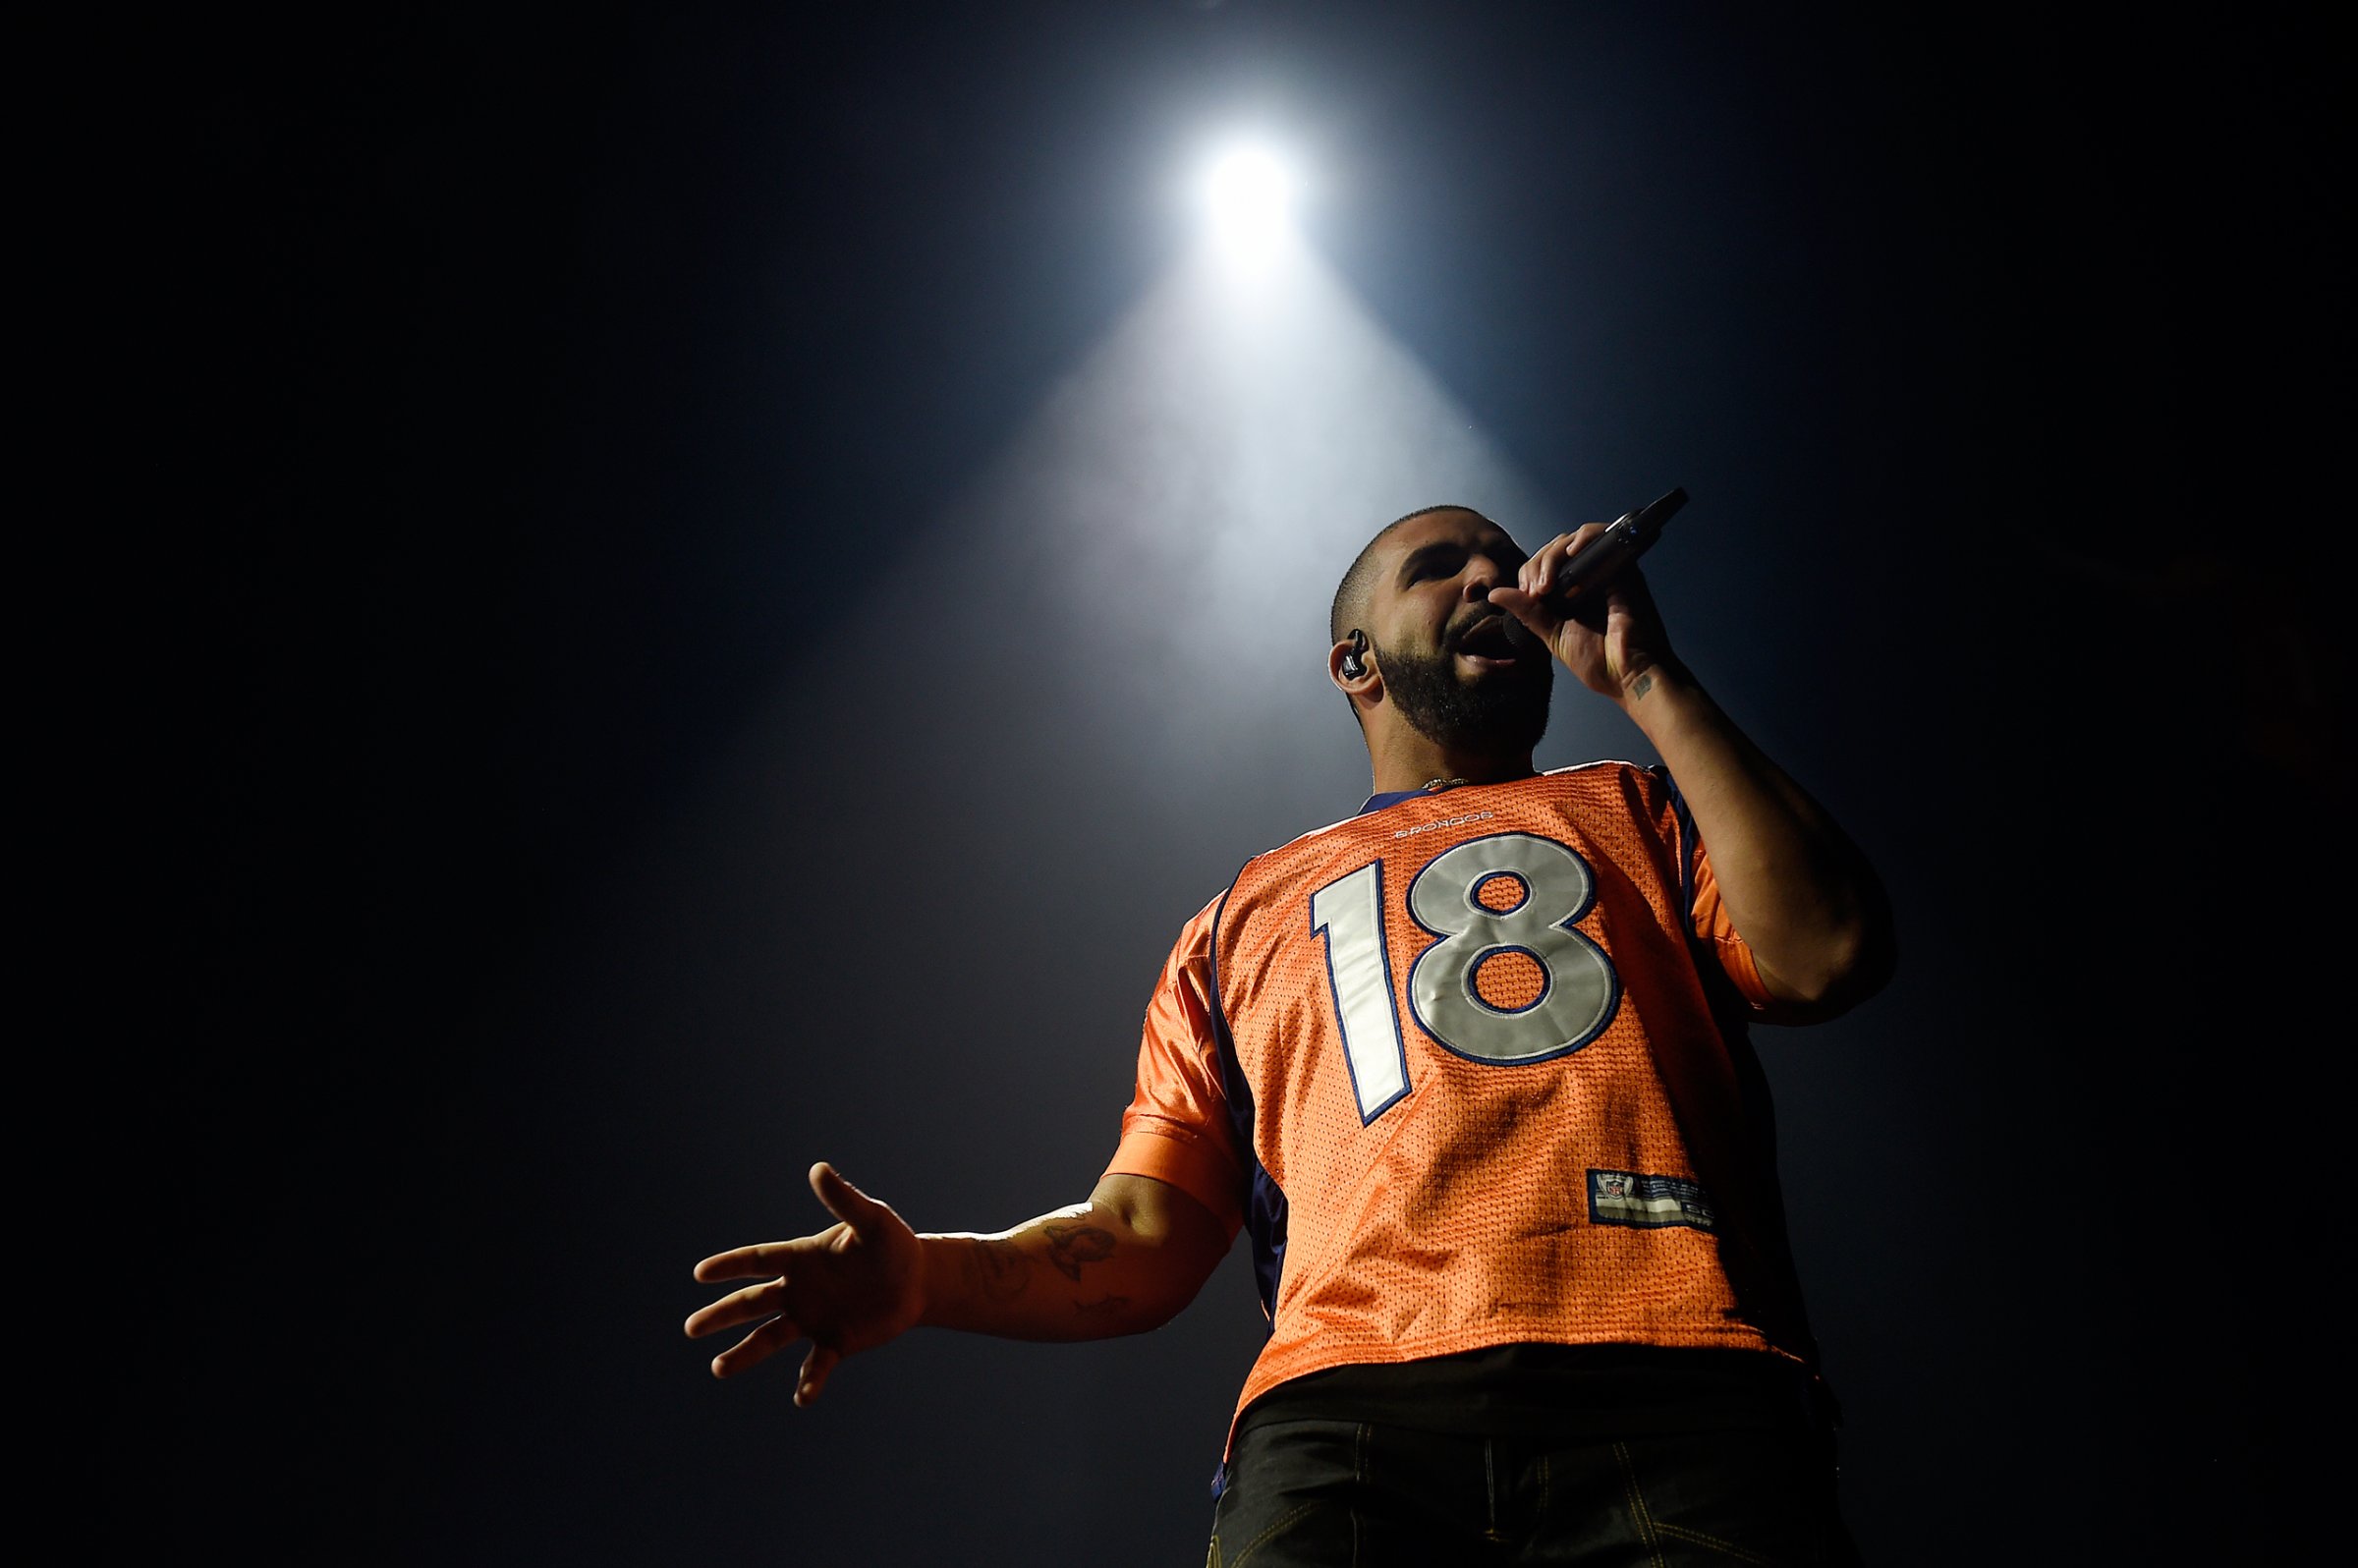 DENVER, CO - OCTOBER 2: Drake performs at the Pepsi Center in Denver, Colorado on October 2, 2016. (Photo by Seth McConnell/The Denver Post via Getty Images)